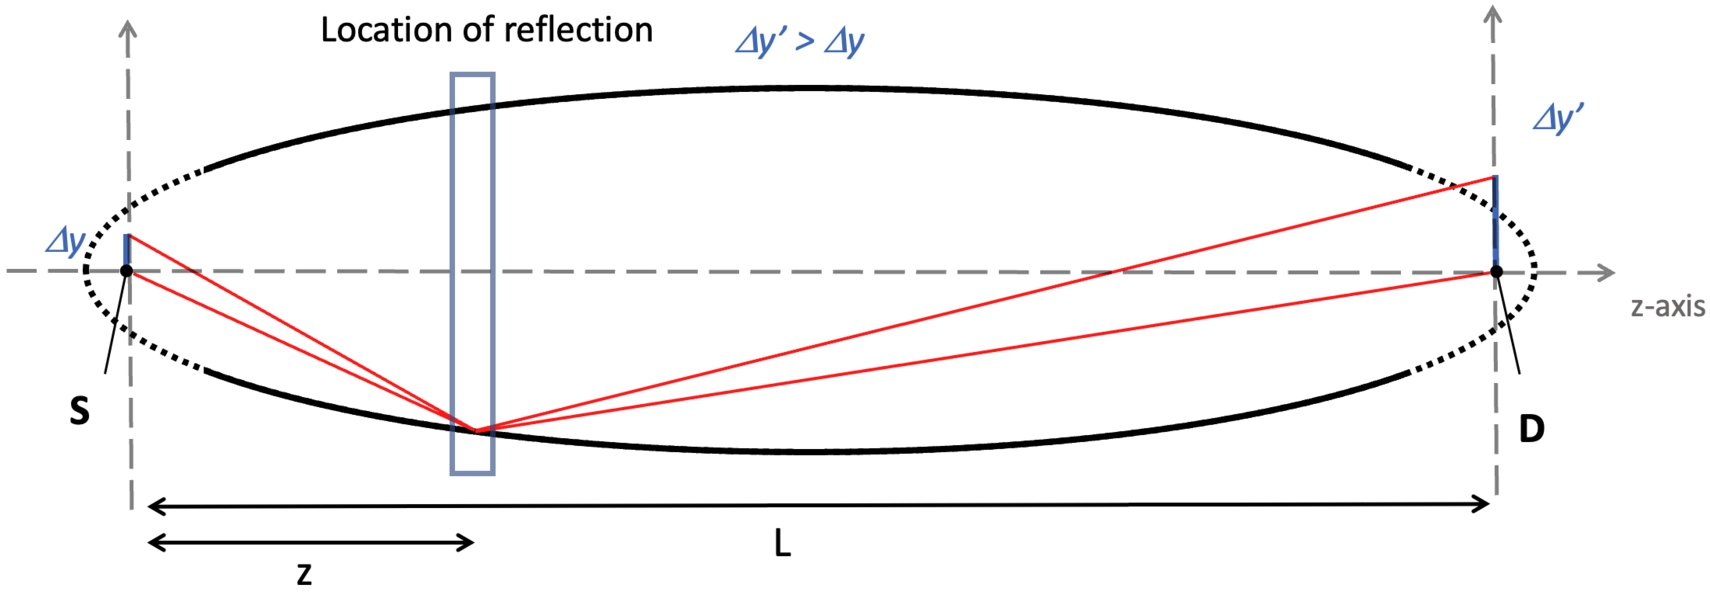 Off-axis magnification of an elliptical reflector. The origin at the source S in the left focal point, L is distance between focal points and to the detector D, and z is the coordinate of reflection along z-axis. Ghe off-axis height at the source is given by Δy′, and Δy′ is the height at the detector.